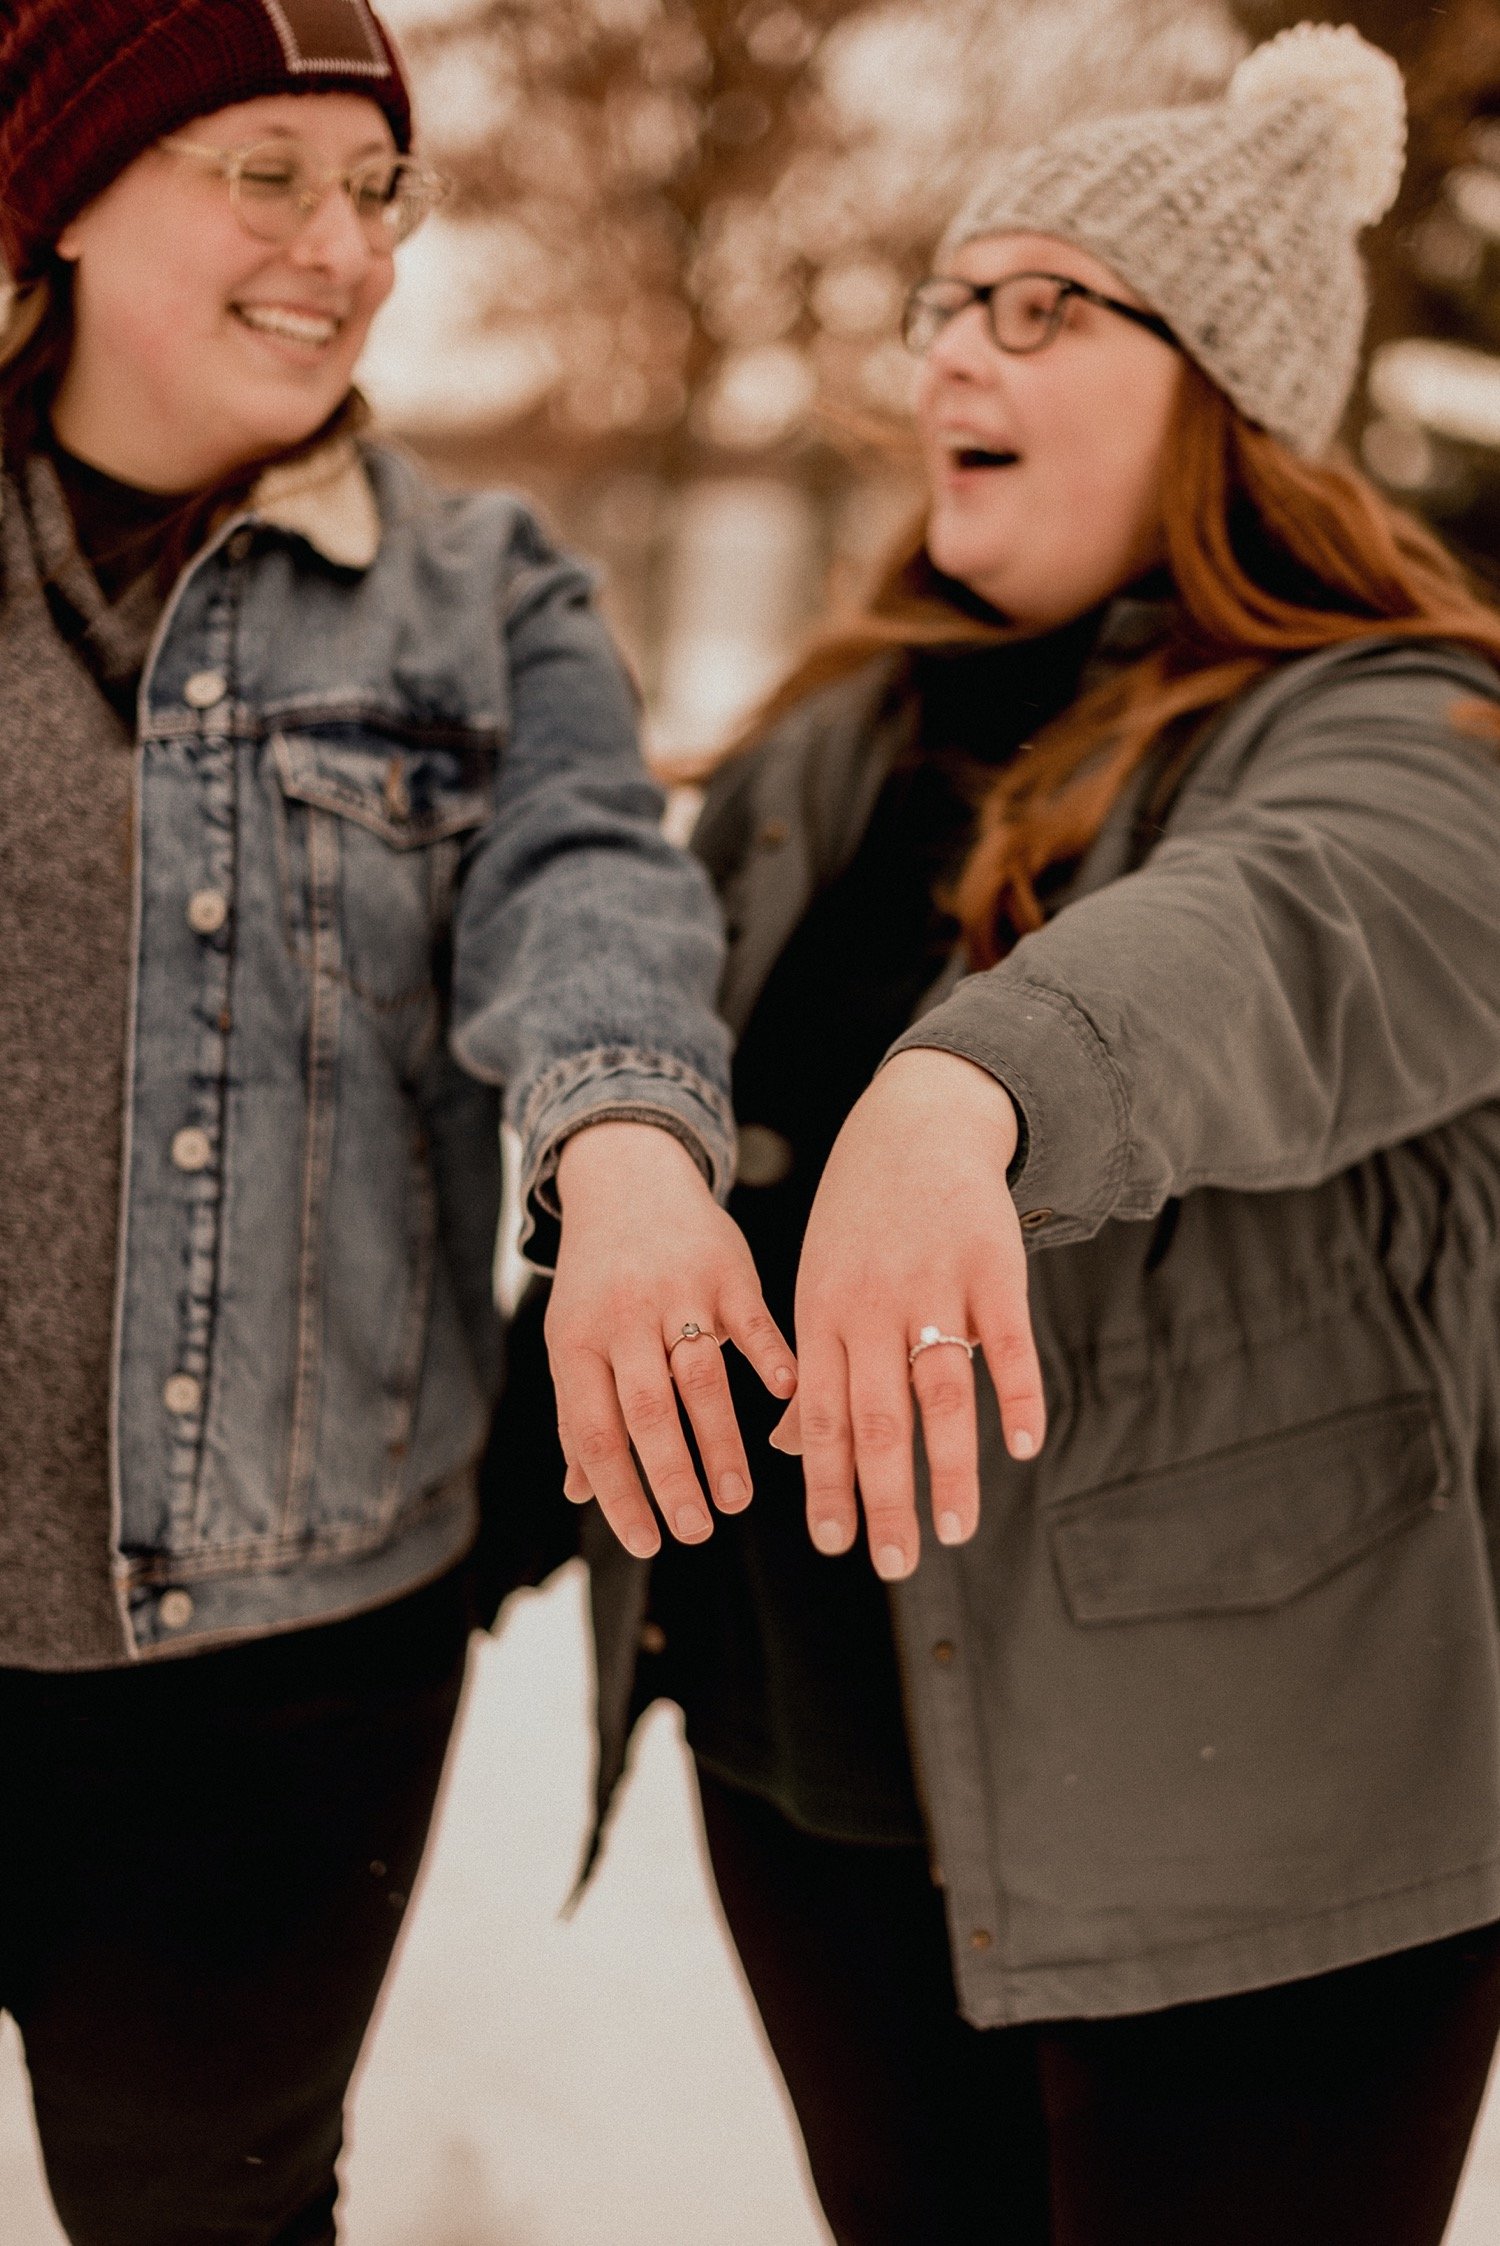 Couple-shows-off-their-rings-after-they-proposed-to-each-other.jpg.jpg